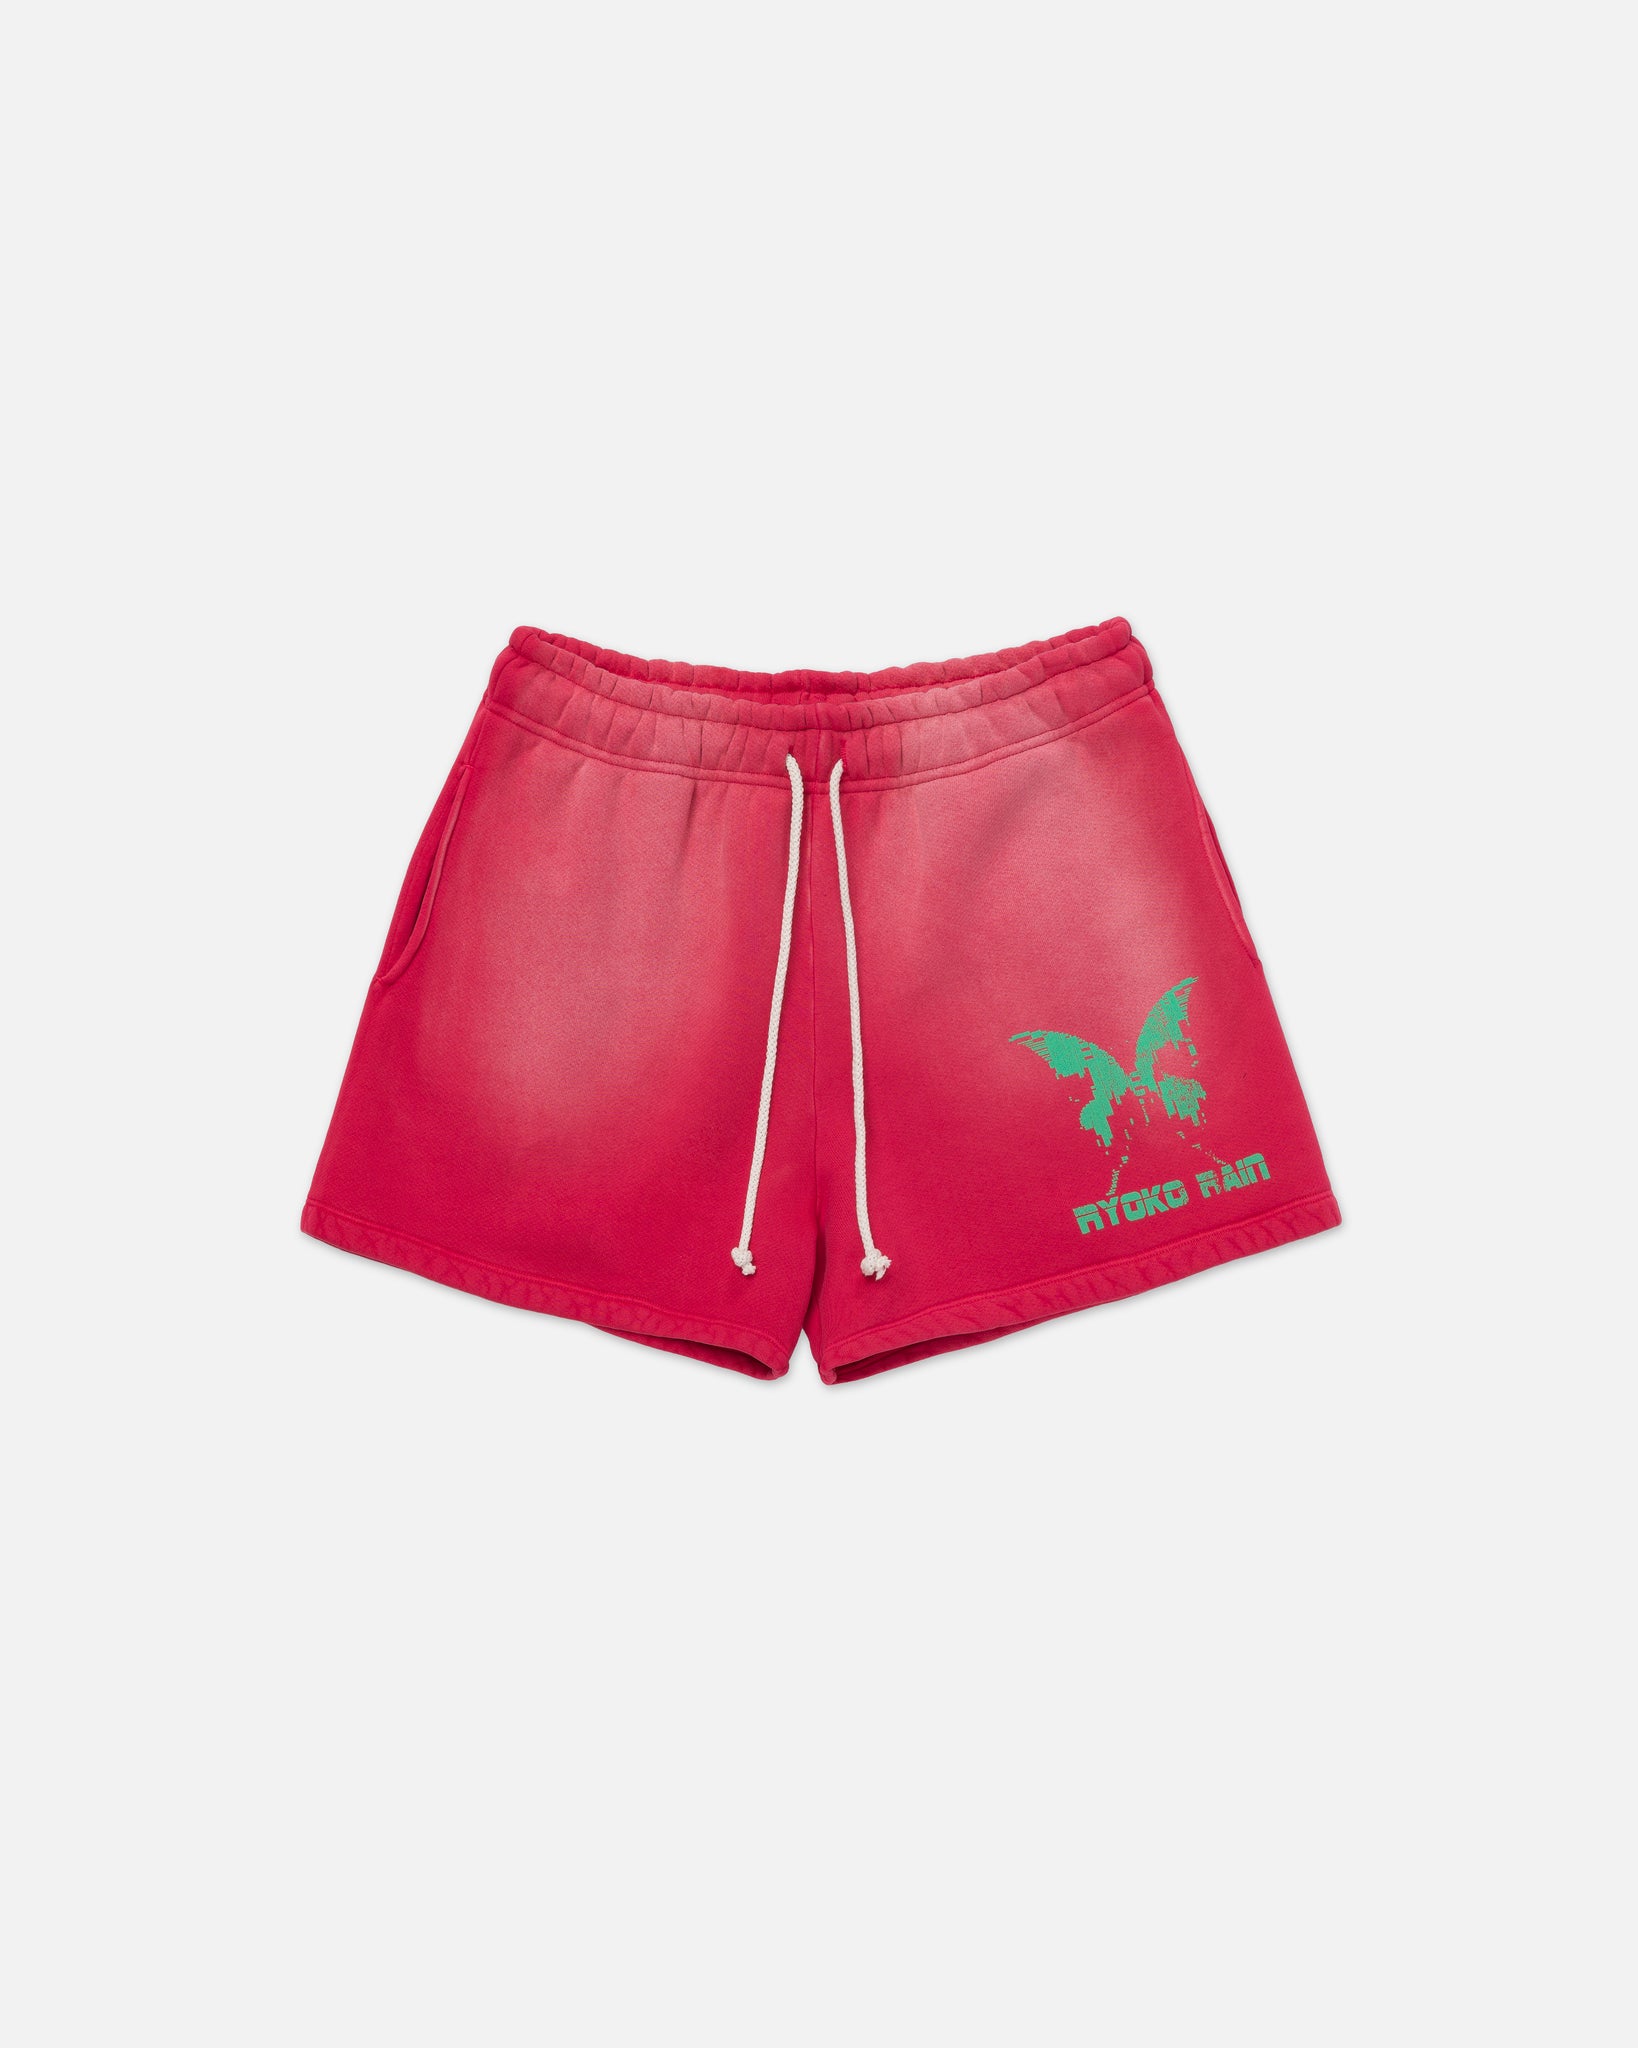 TIME WILL TELL COTTON SHORTS - ROSE RED